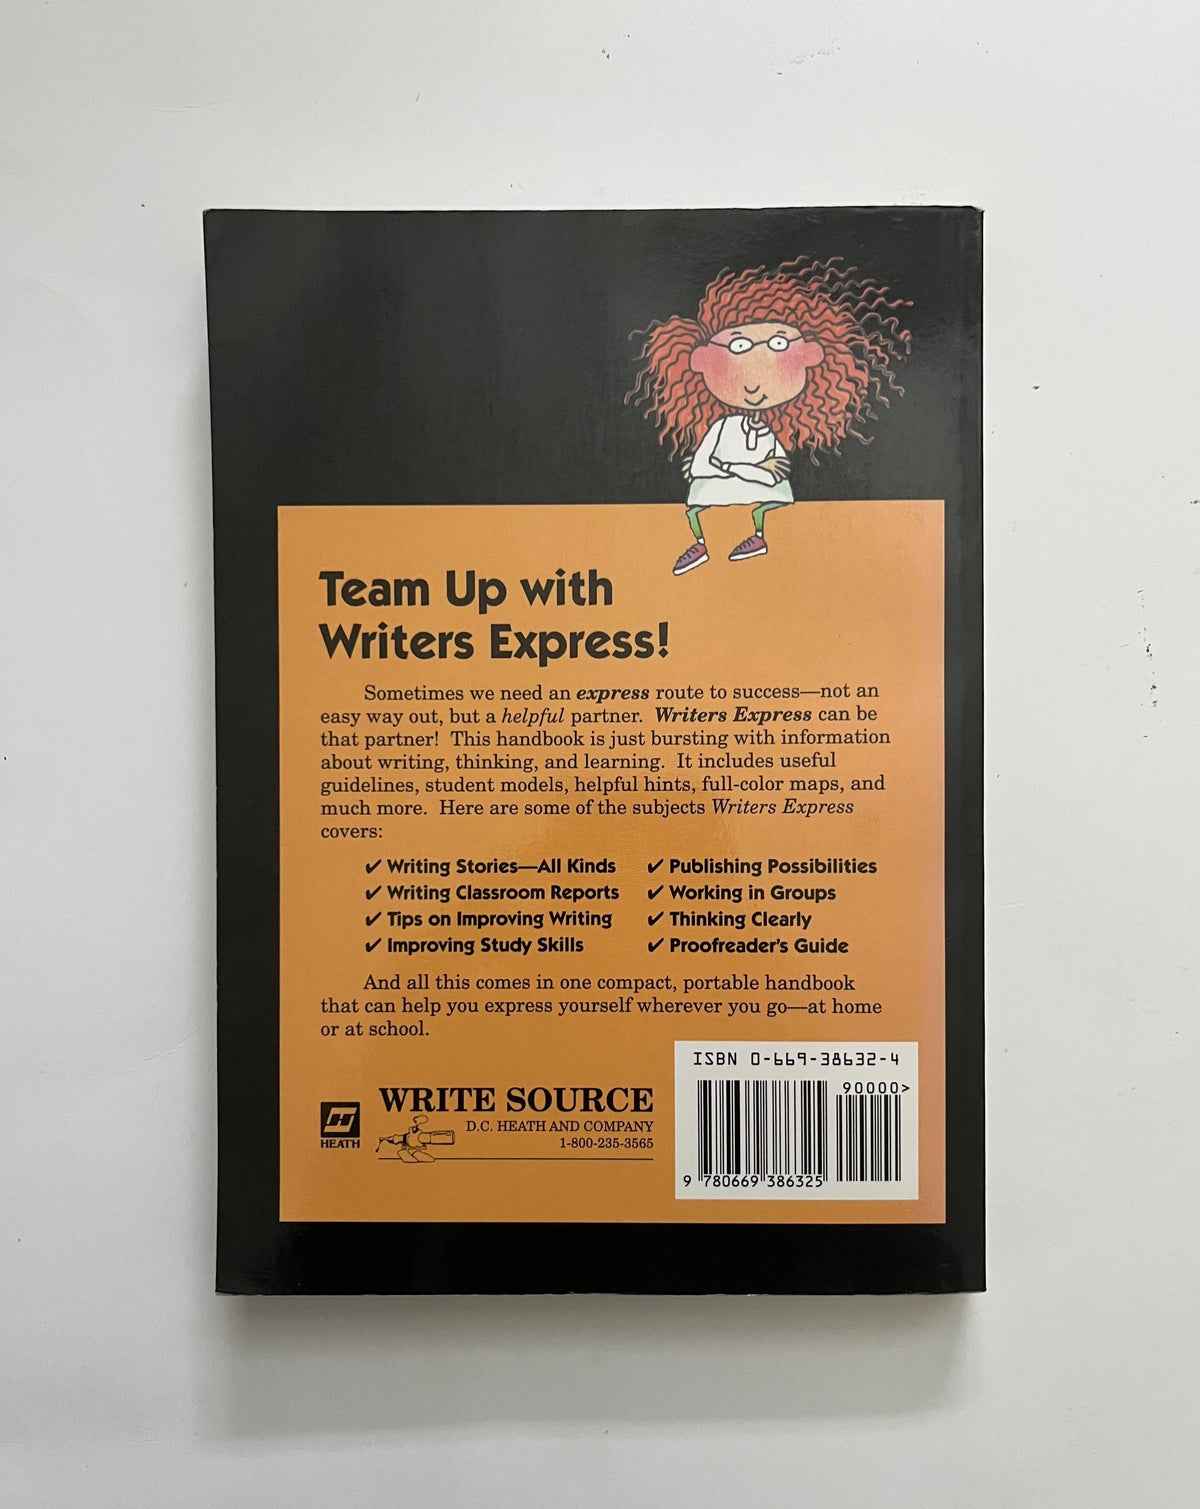 Writer&#39;s Express: A Handbook for Young Writers, Thinkers, and Learners